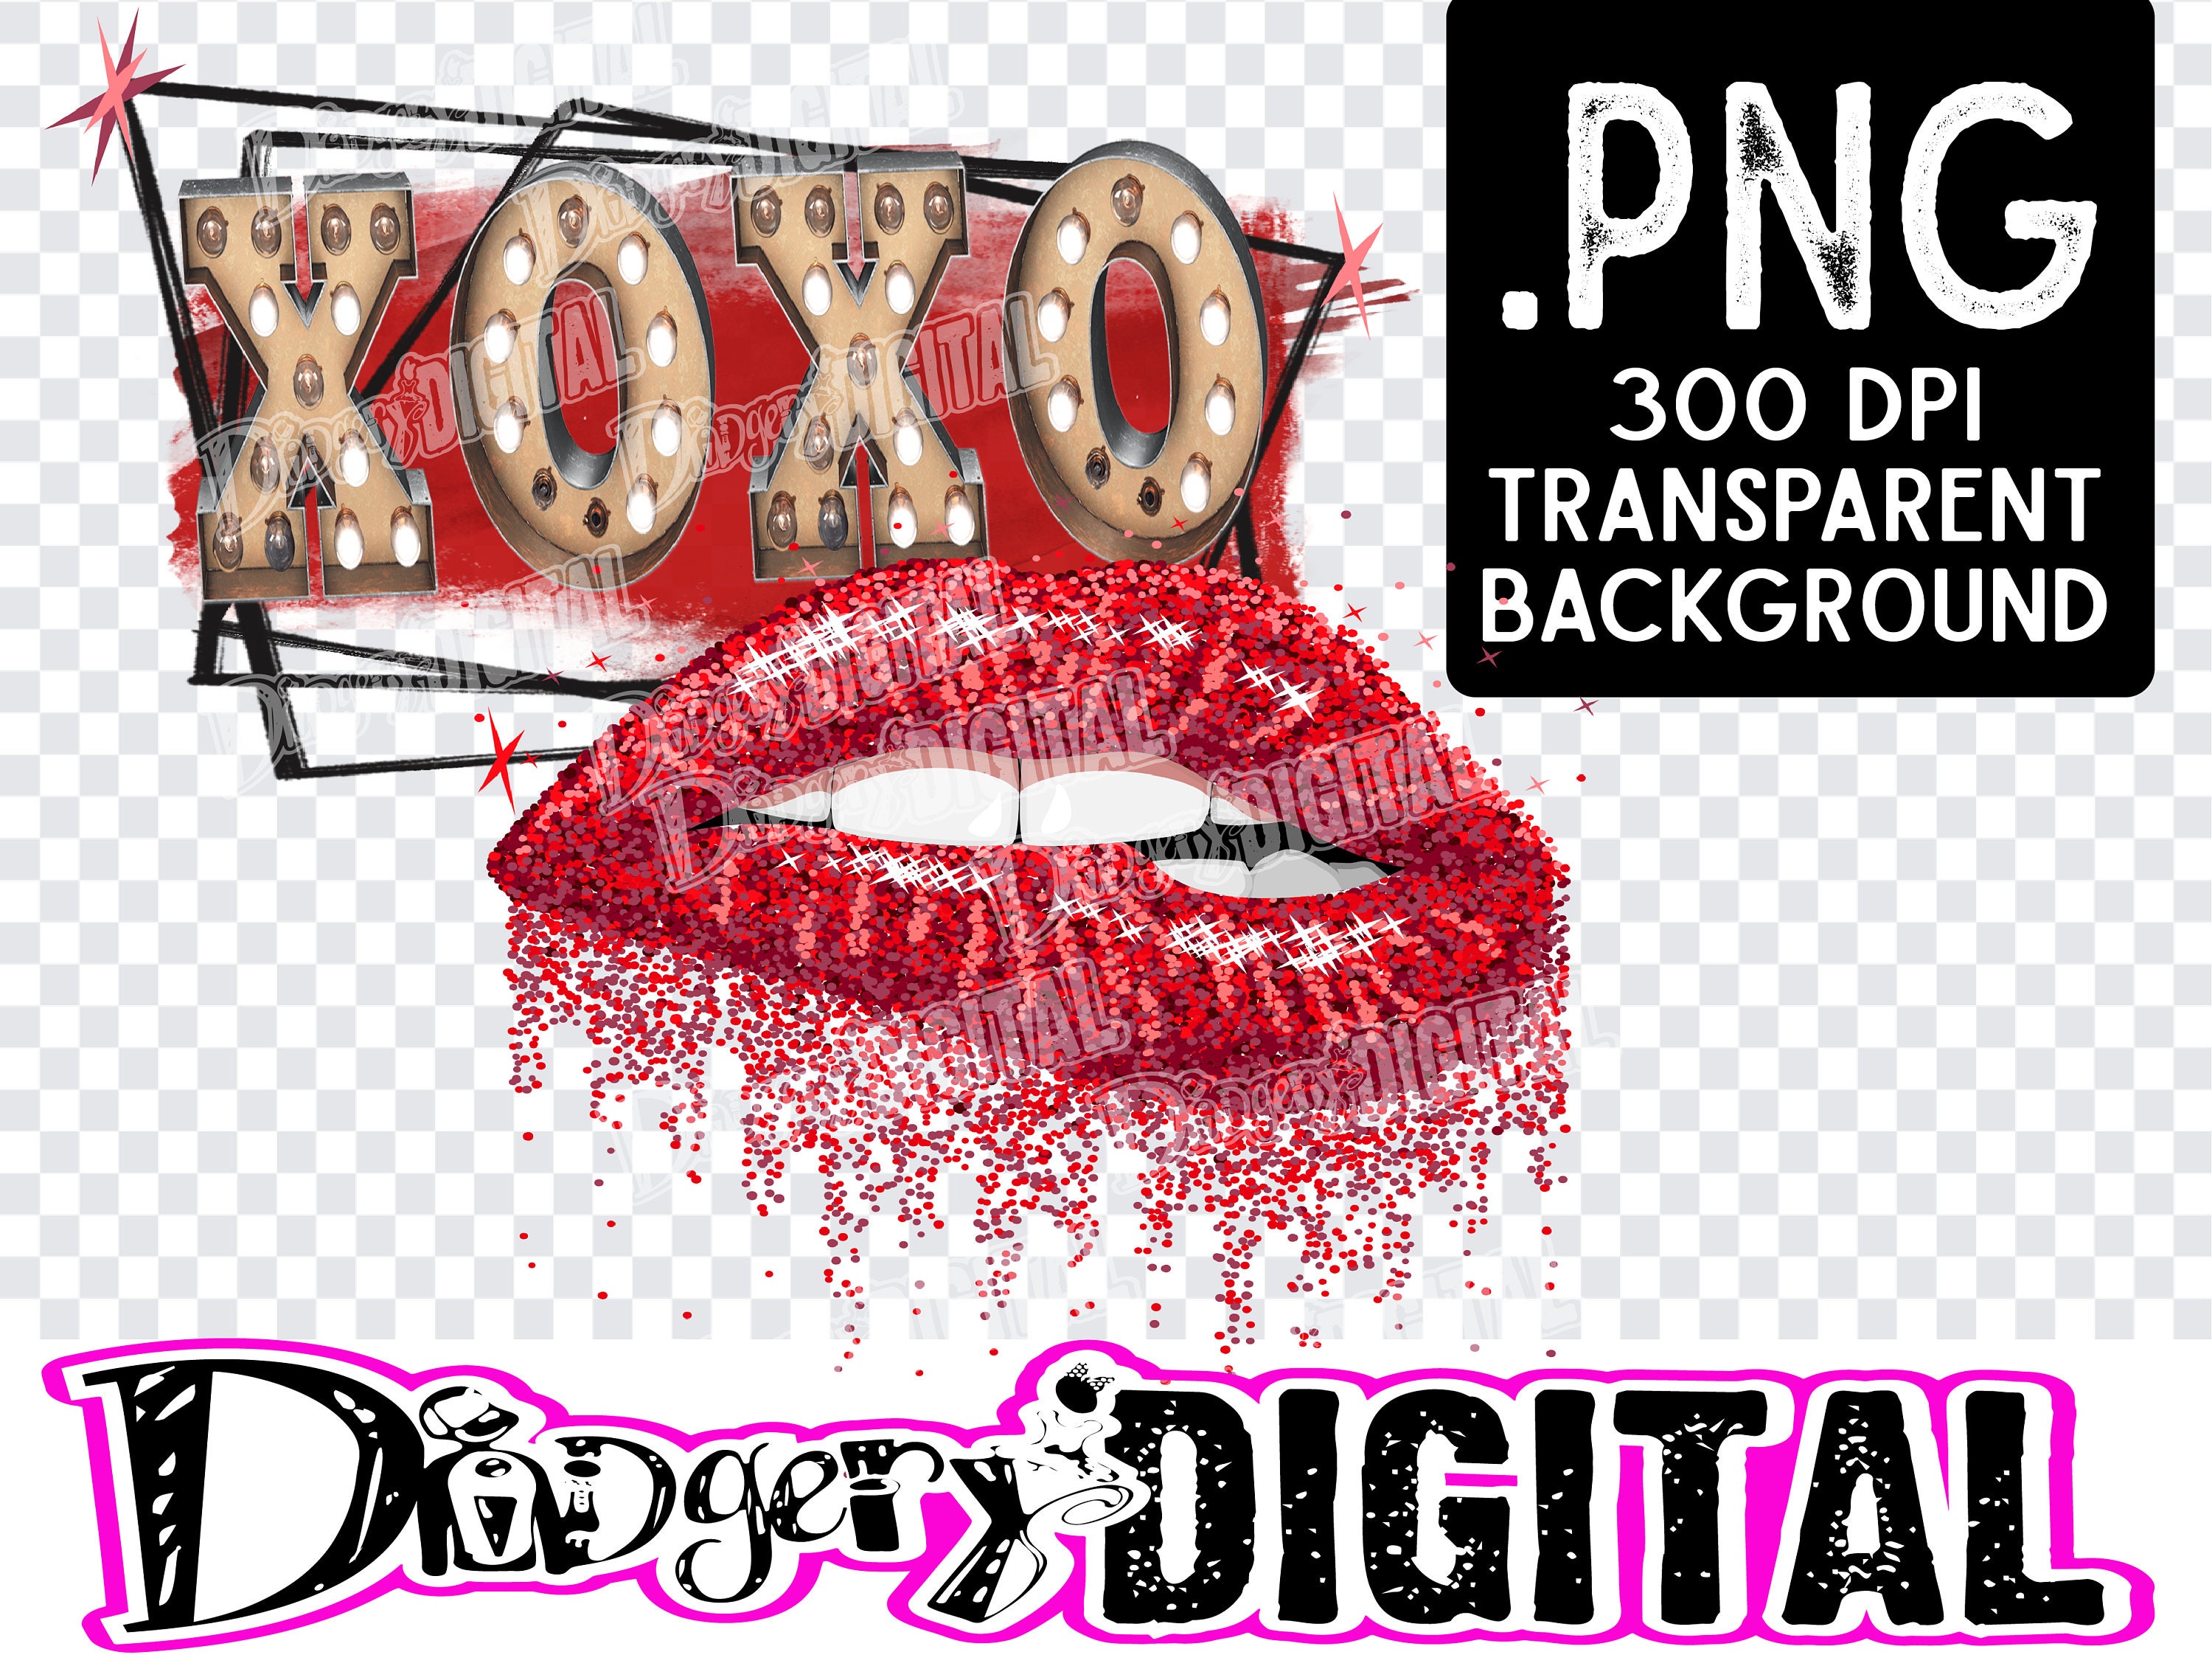 biting lip XOXO glitter effects watercolor digital design 300dpi PNG Transparent Background for Easy Placement